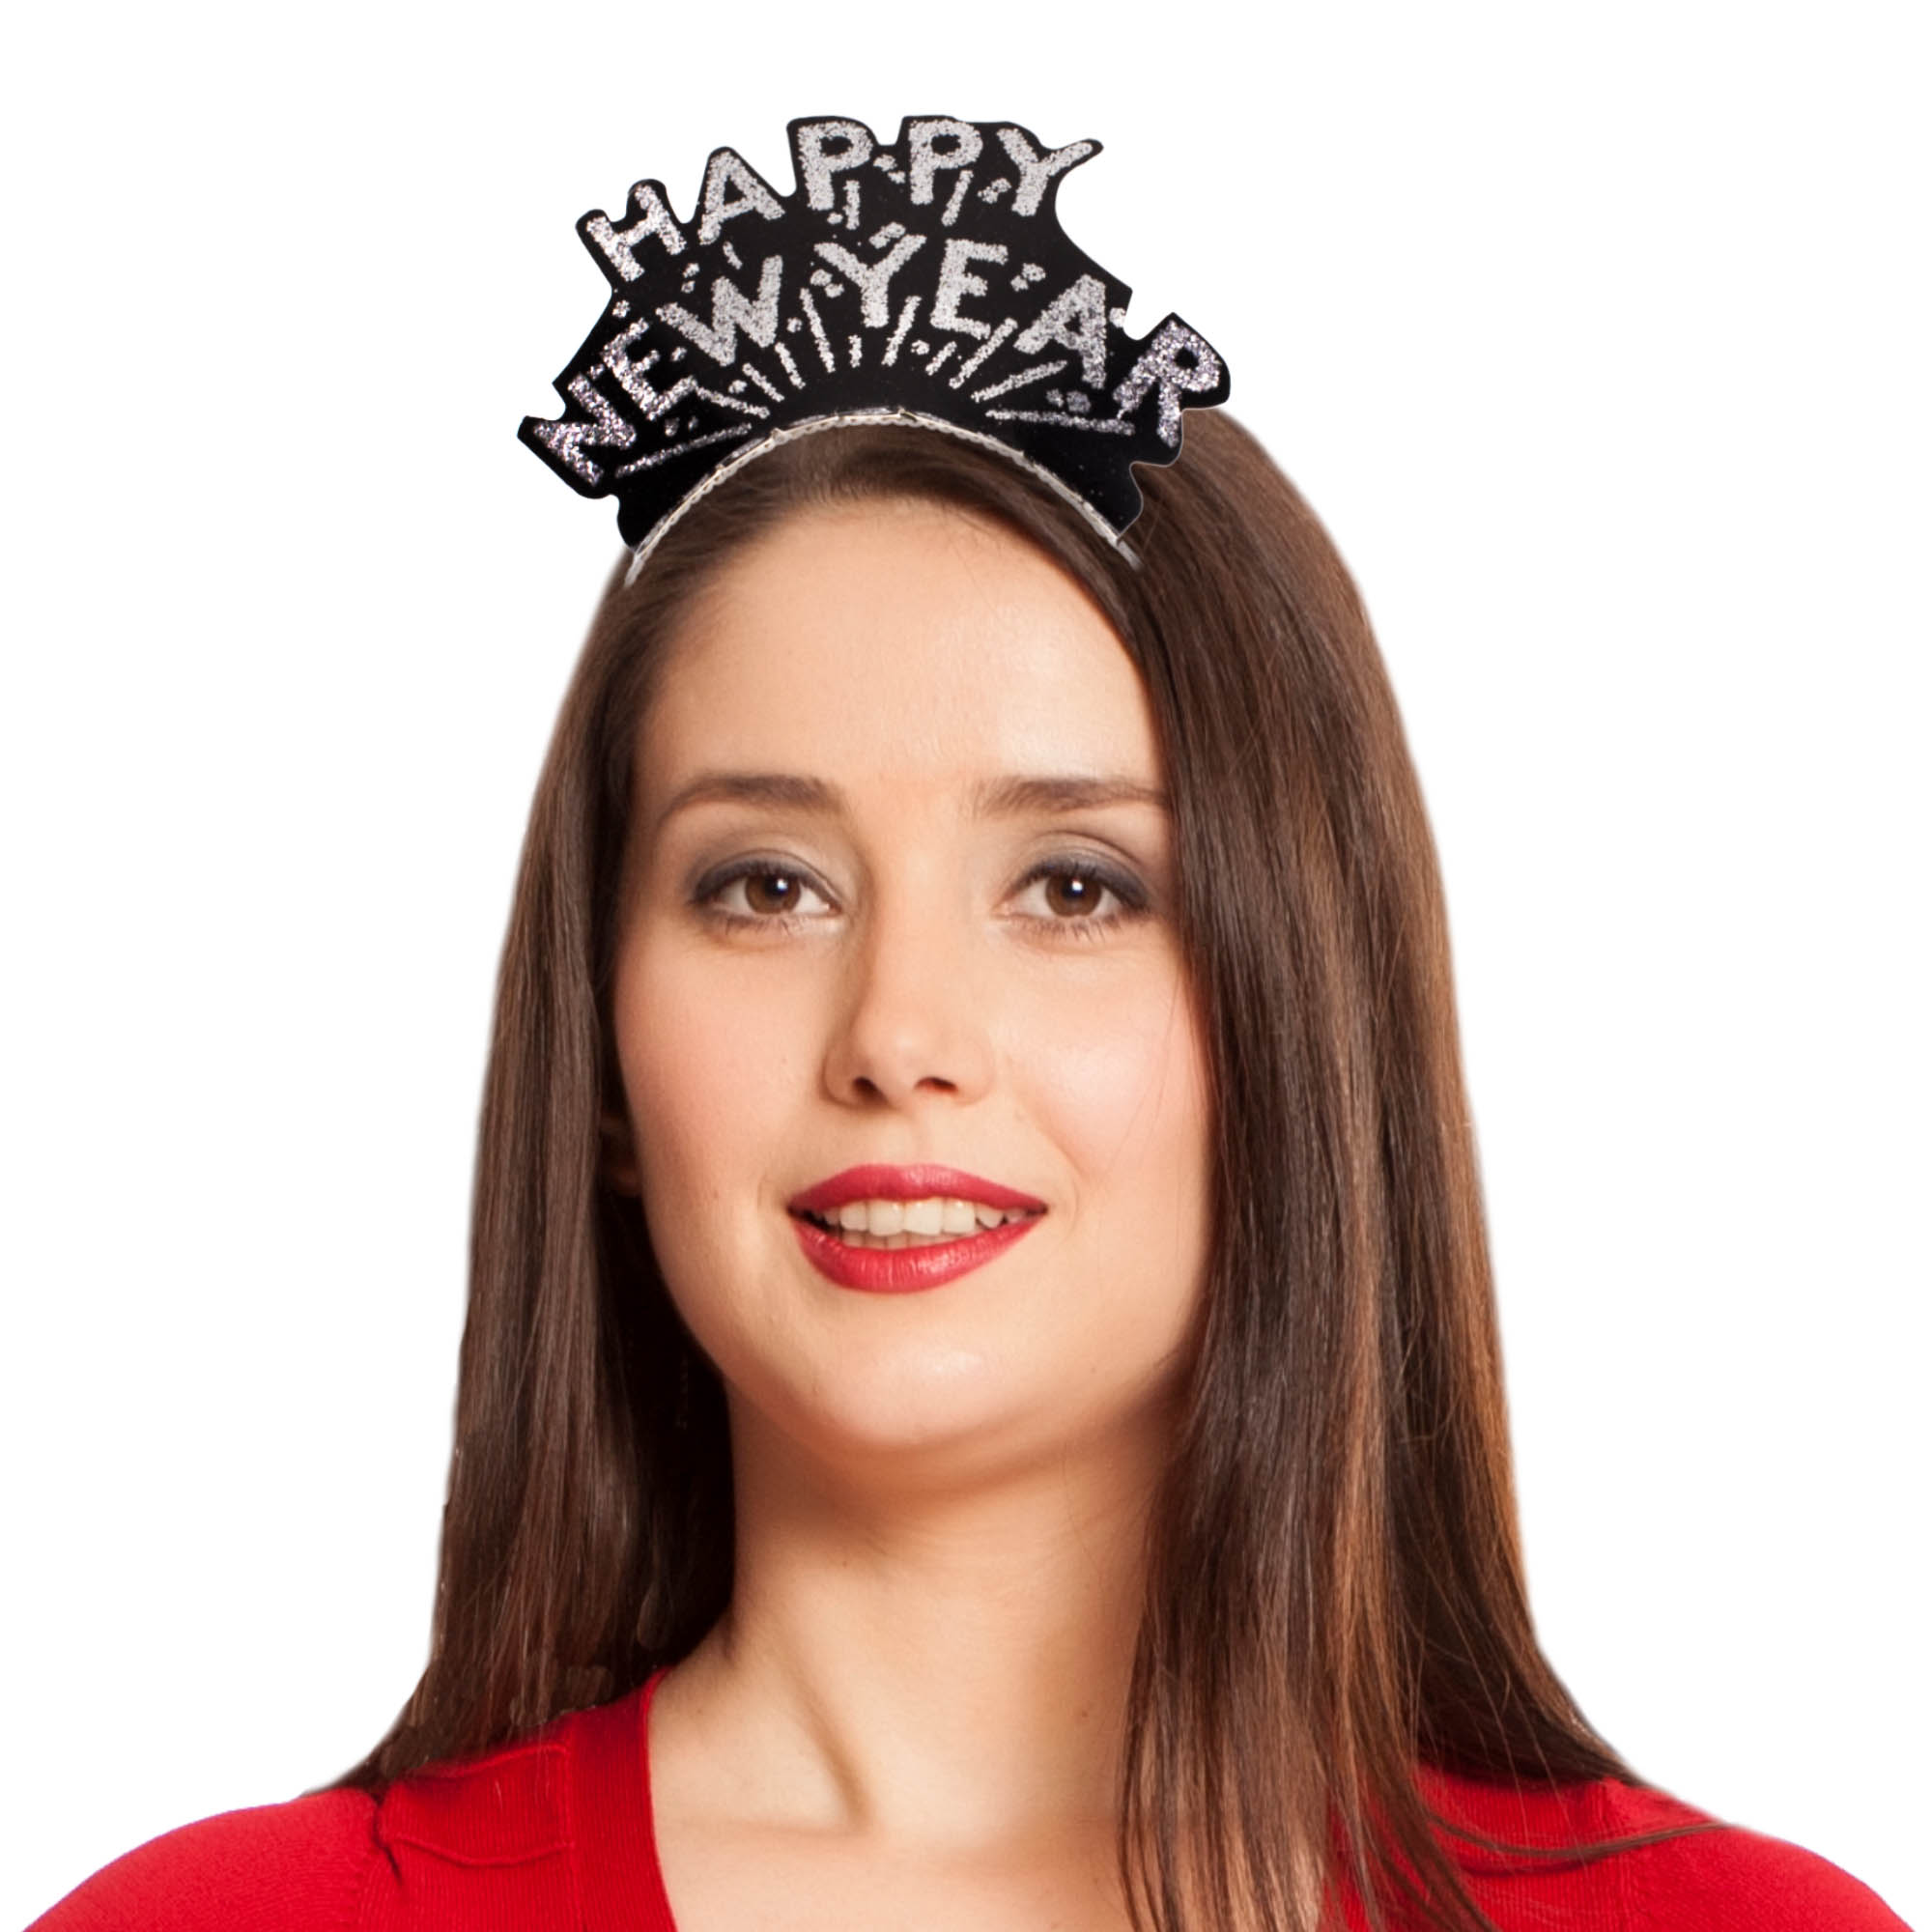 Happy New Year Black & Silver Tiaras - 12 Pack by Windy City Novelties